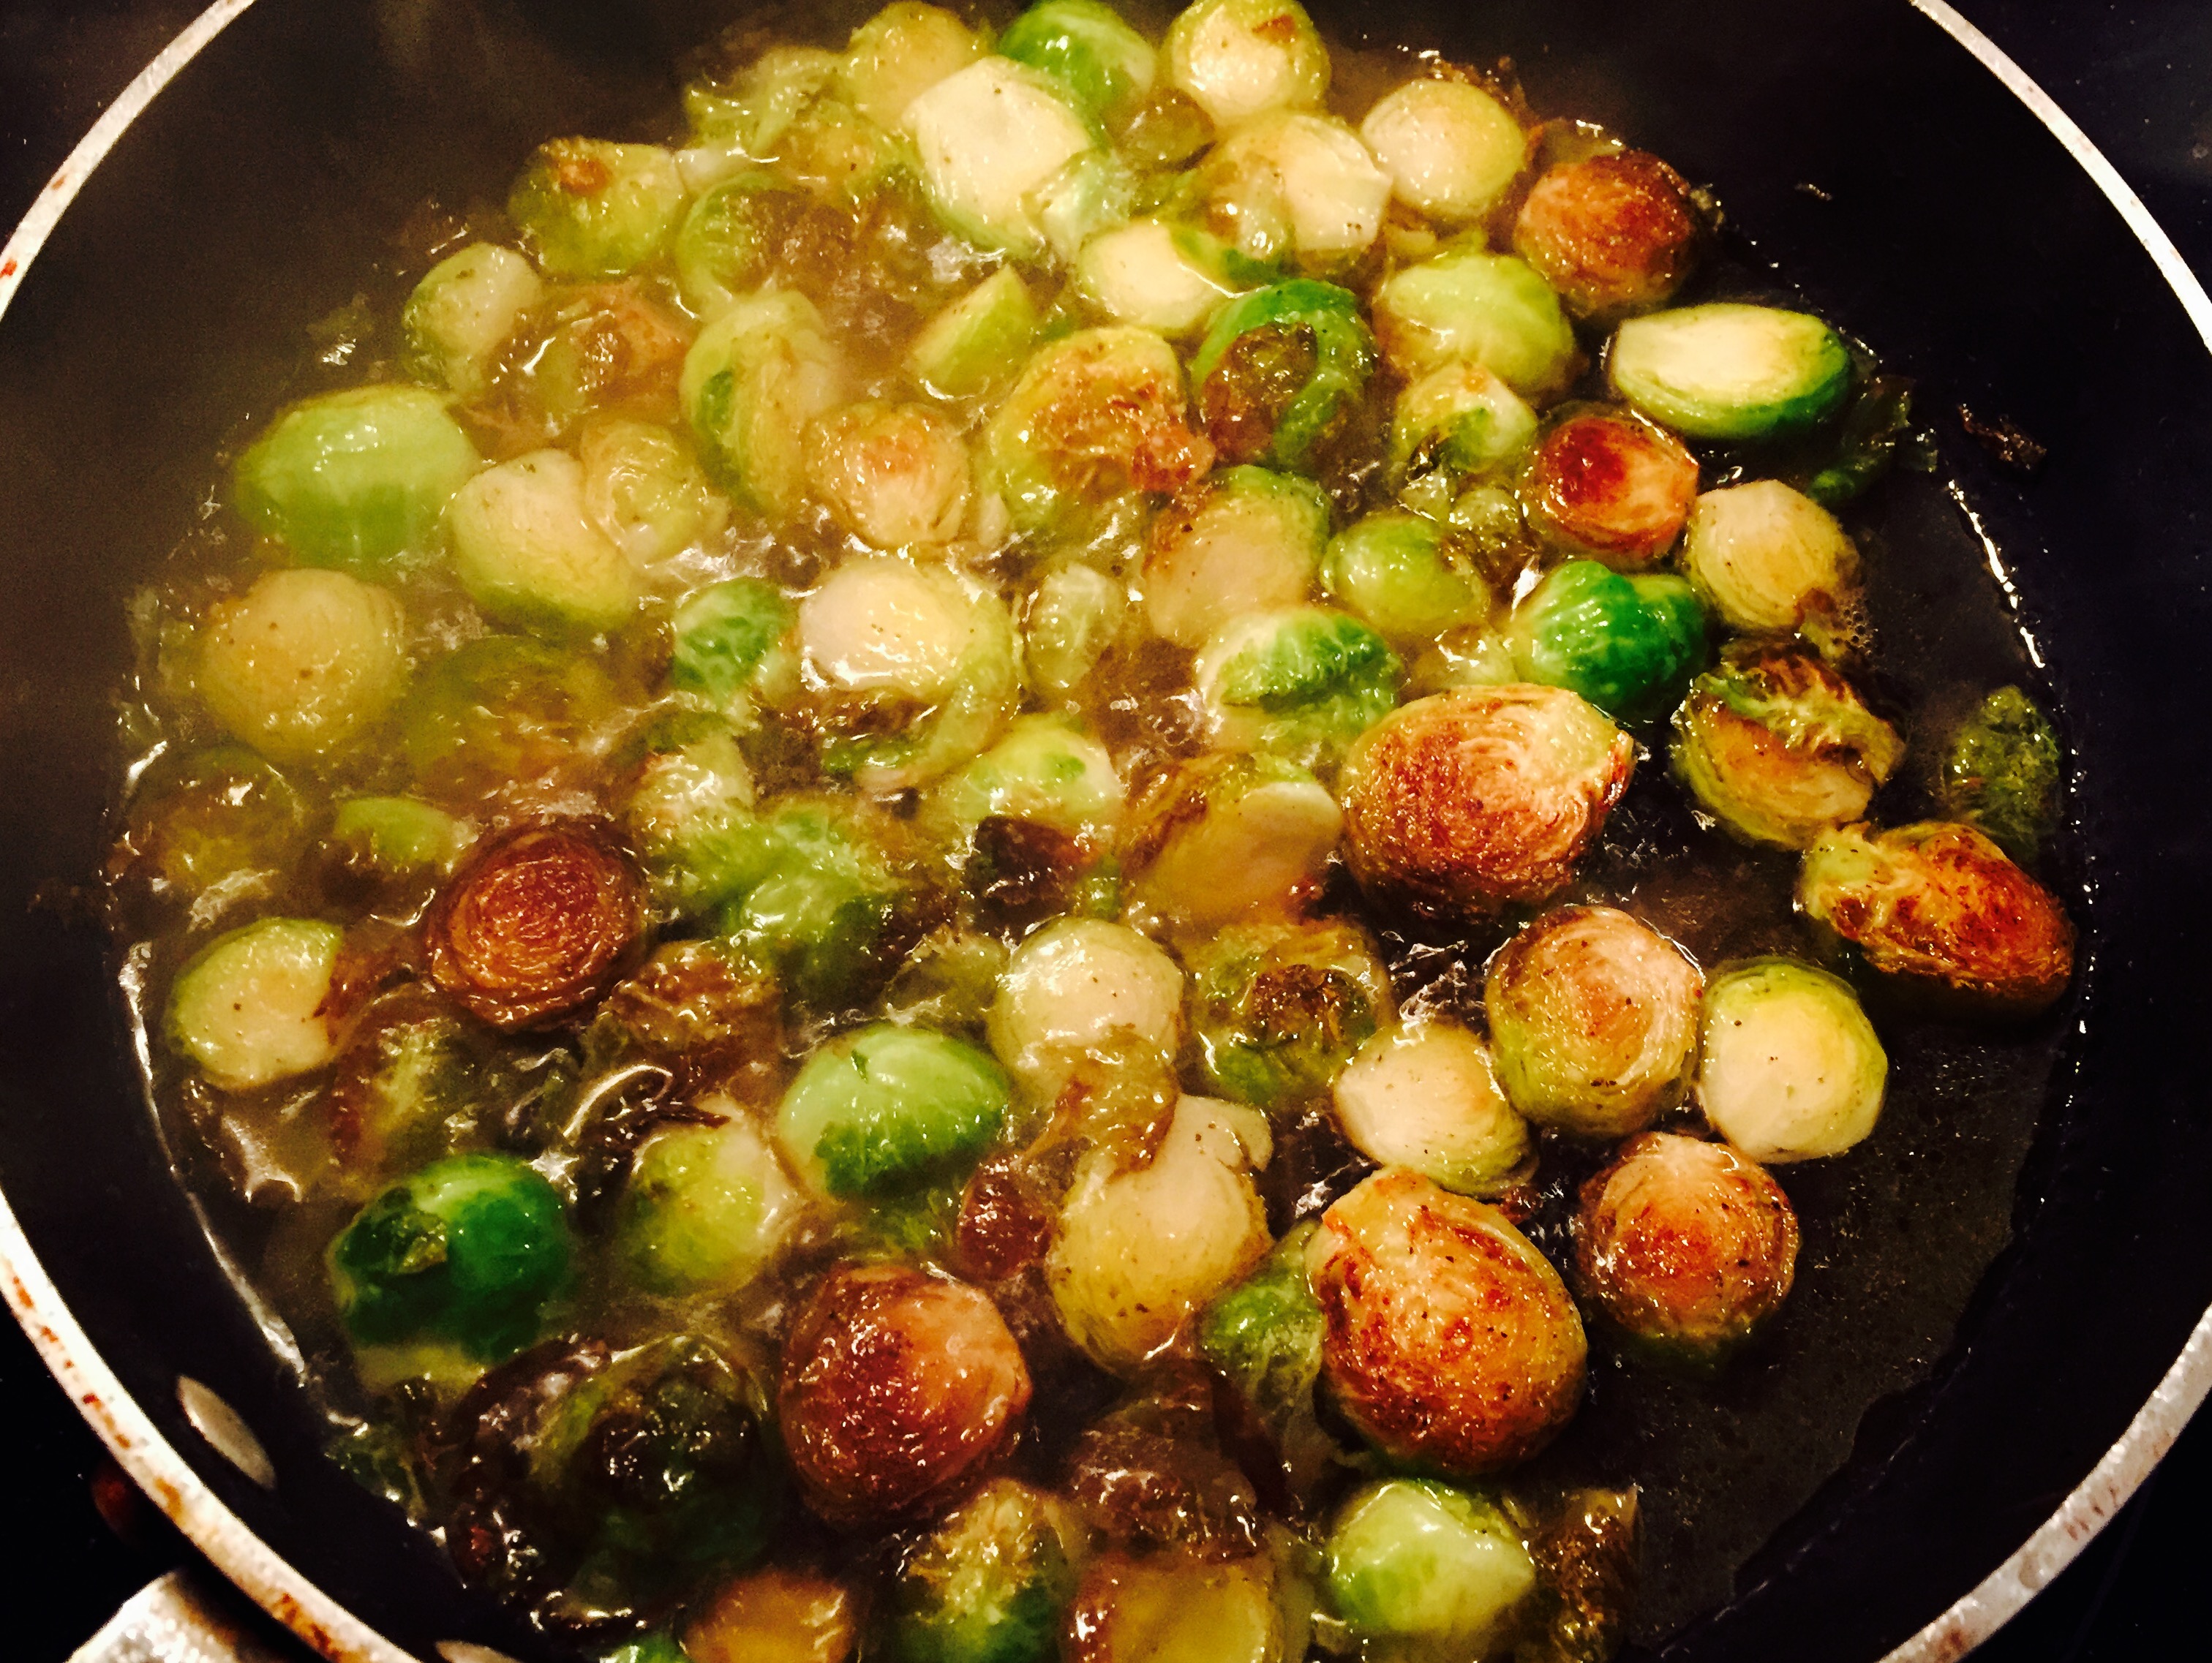 Brussel sprouts simmering after being caramielized into pure deliciousness ... simple and scrumptuous